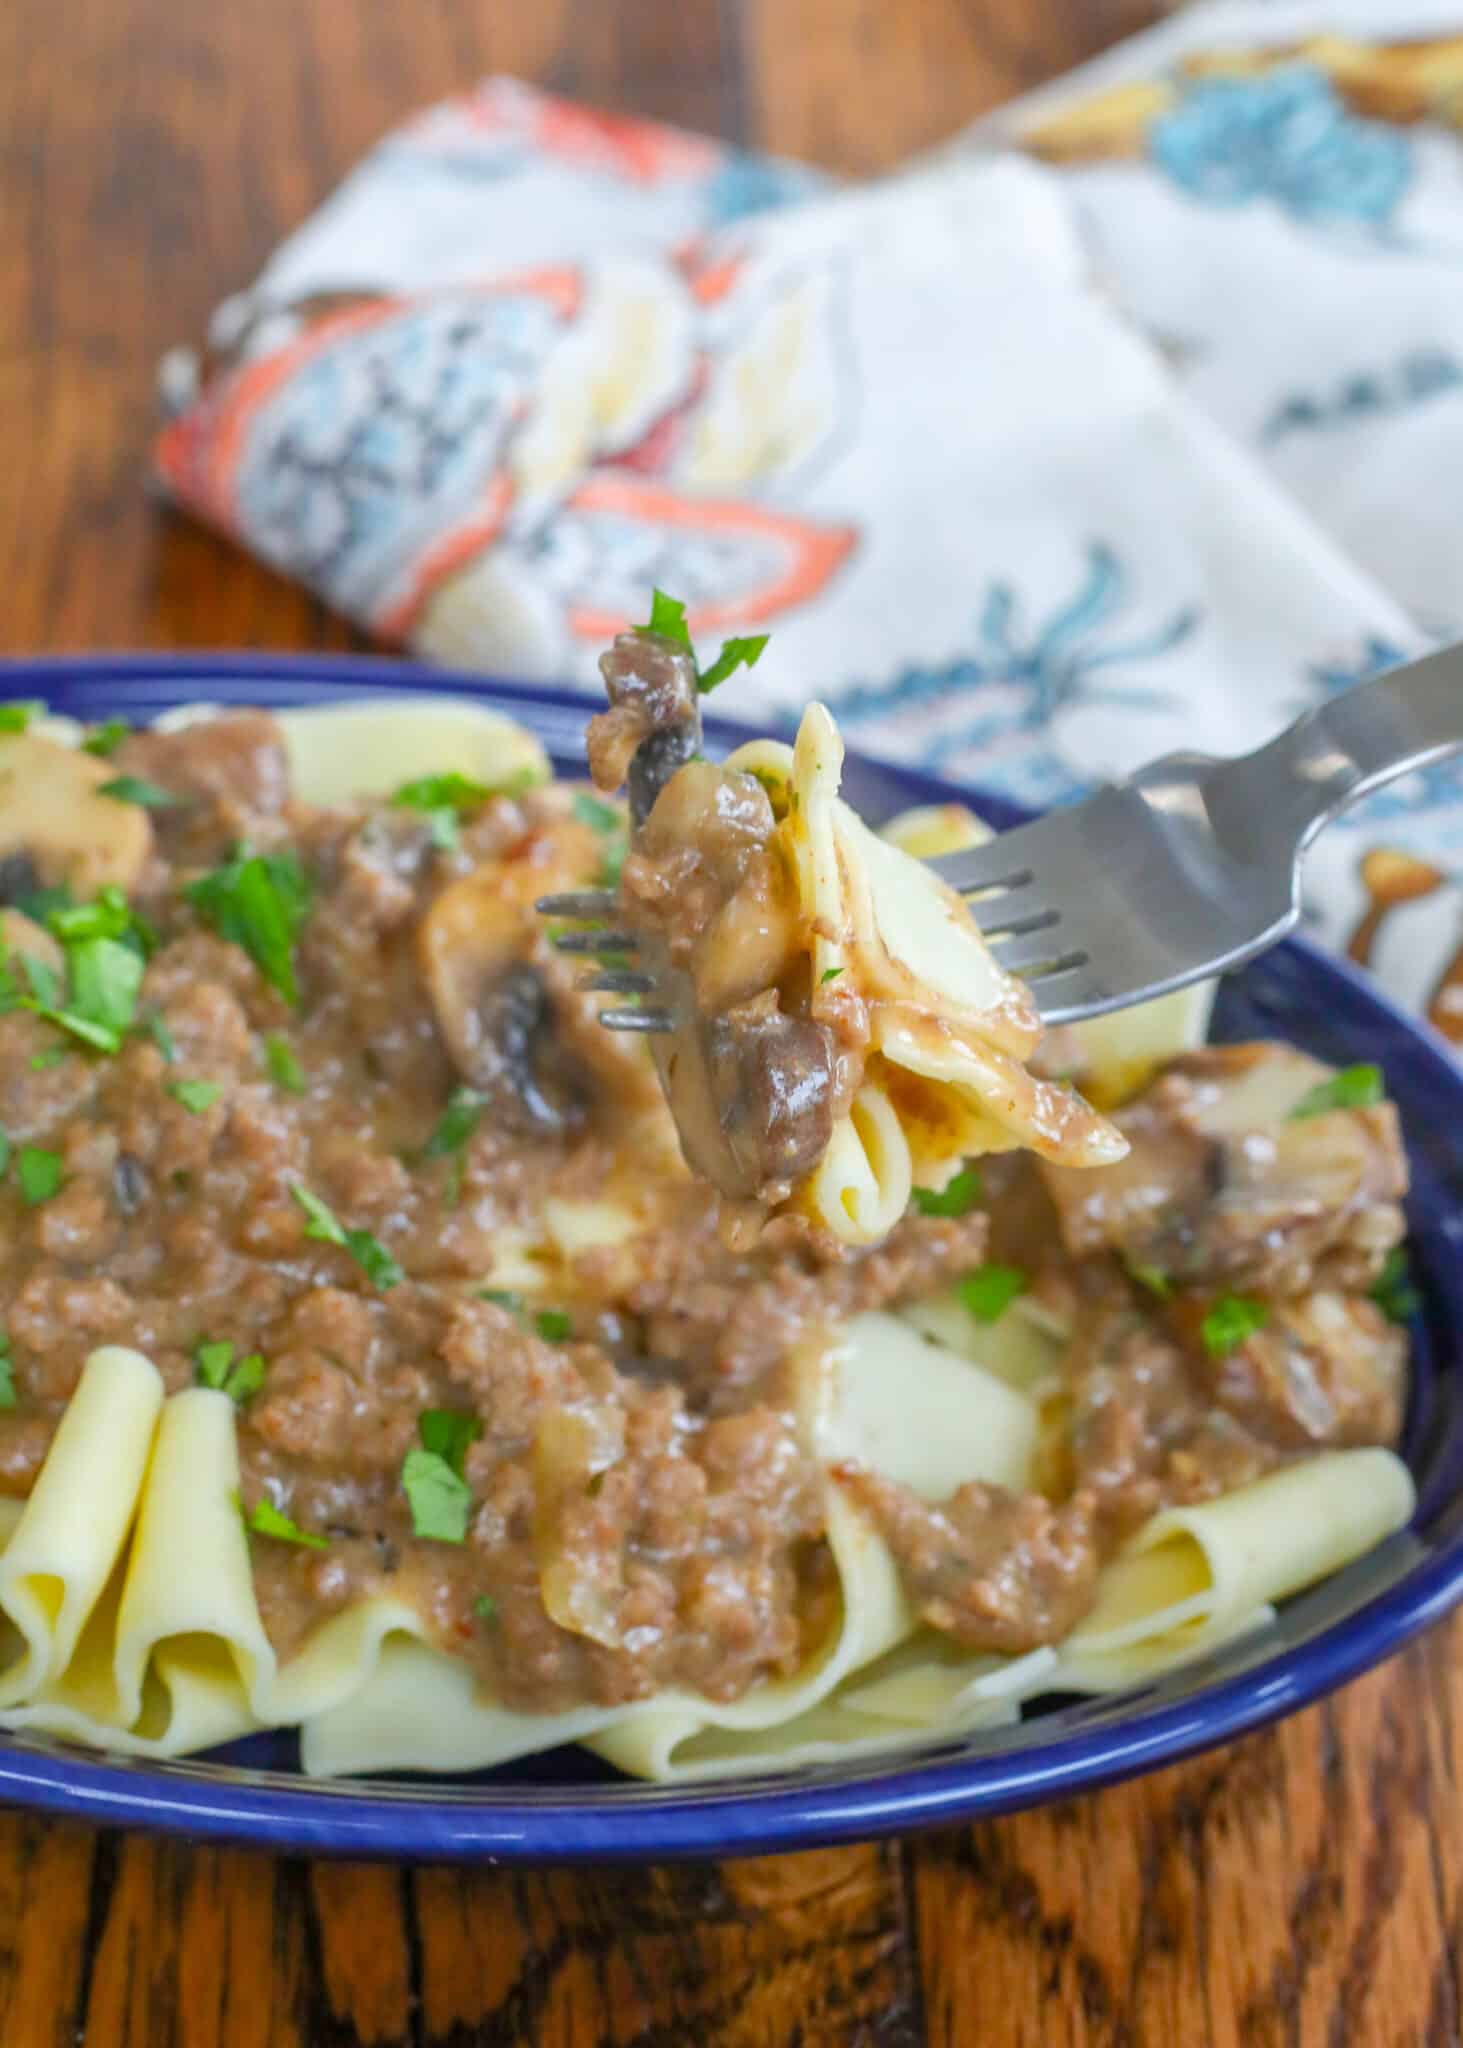 You're going to love this ground beef stroganoff from the very first bite!